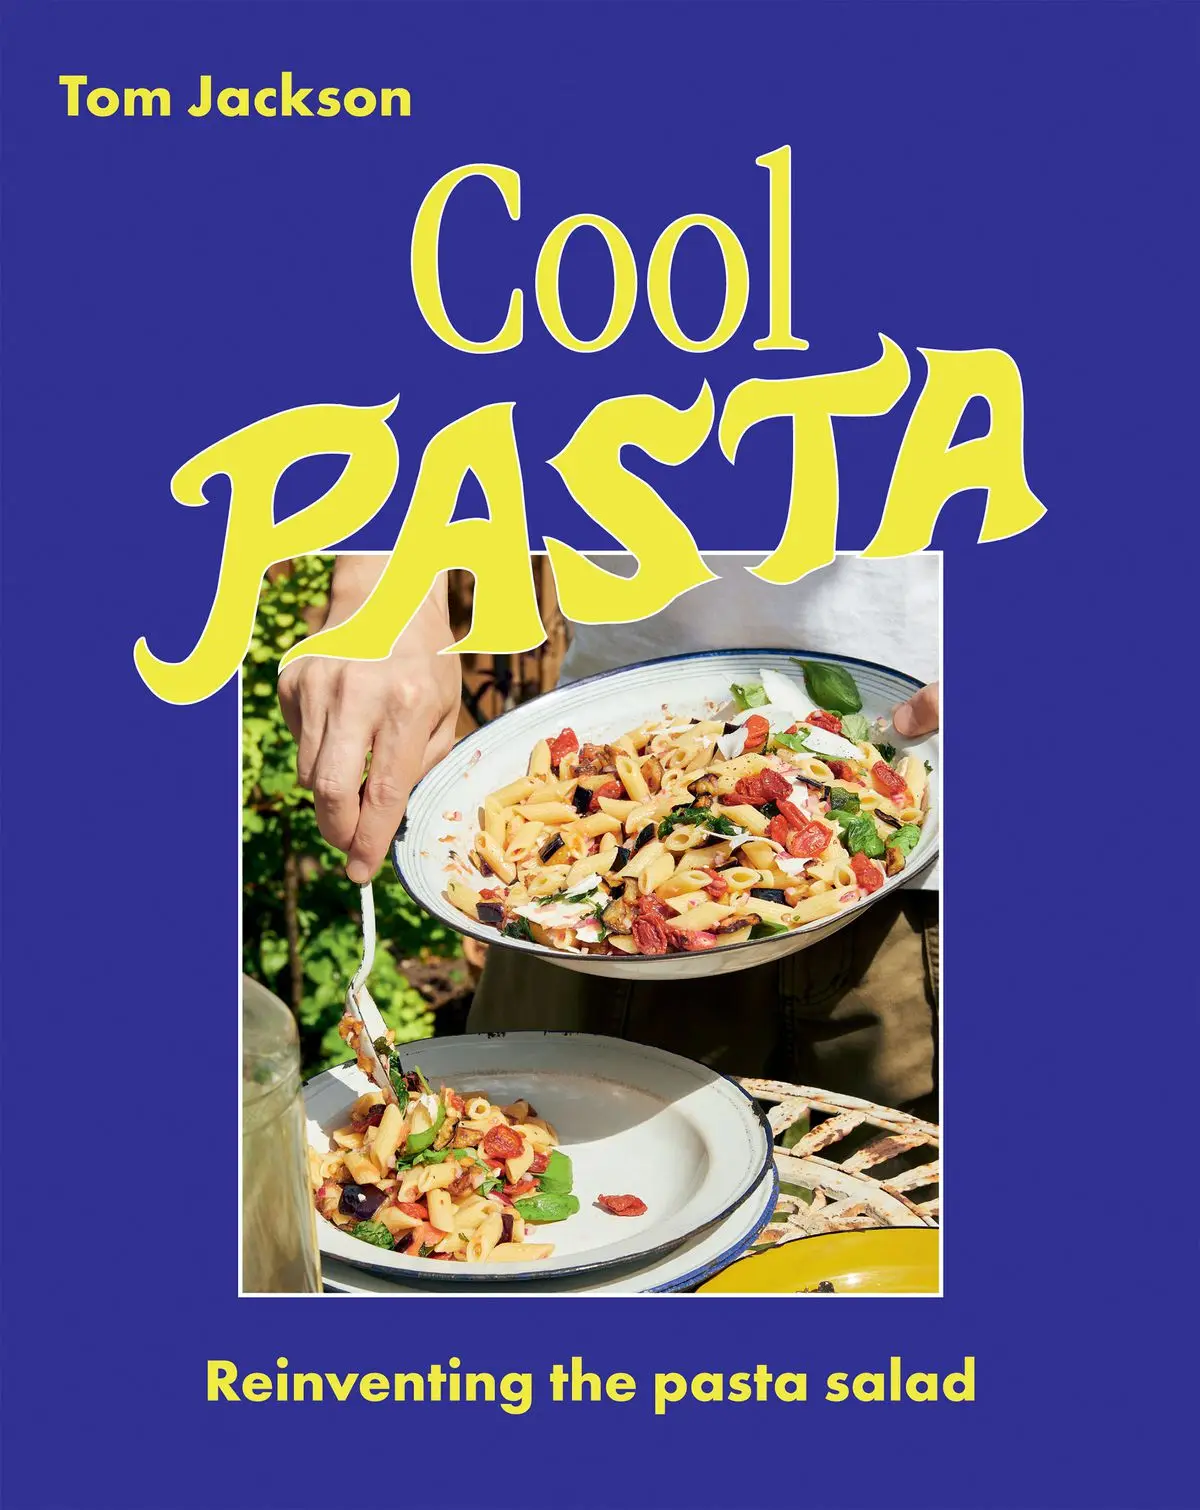 The cover of Cool Pasta